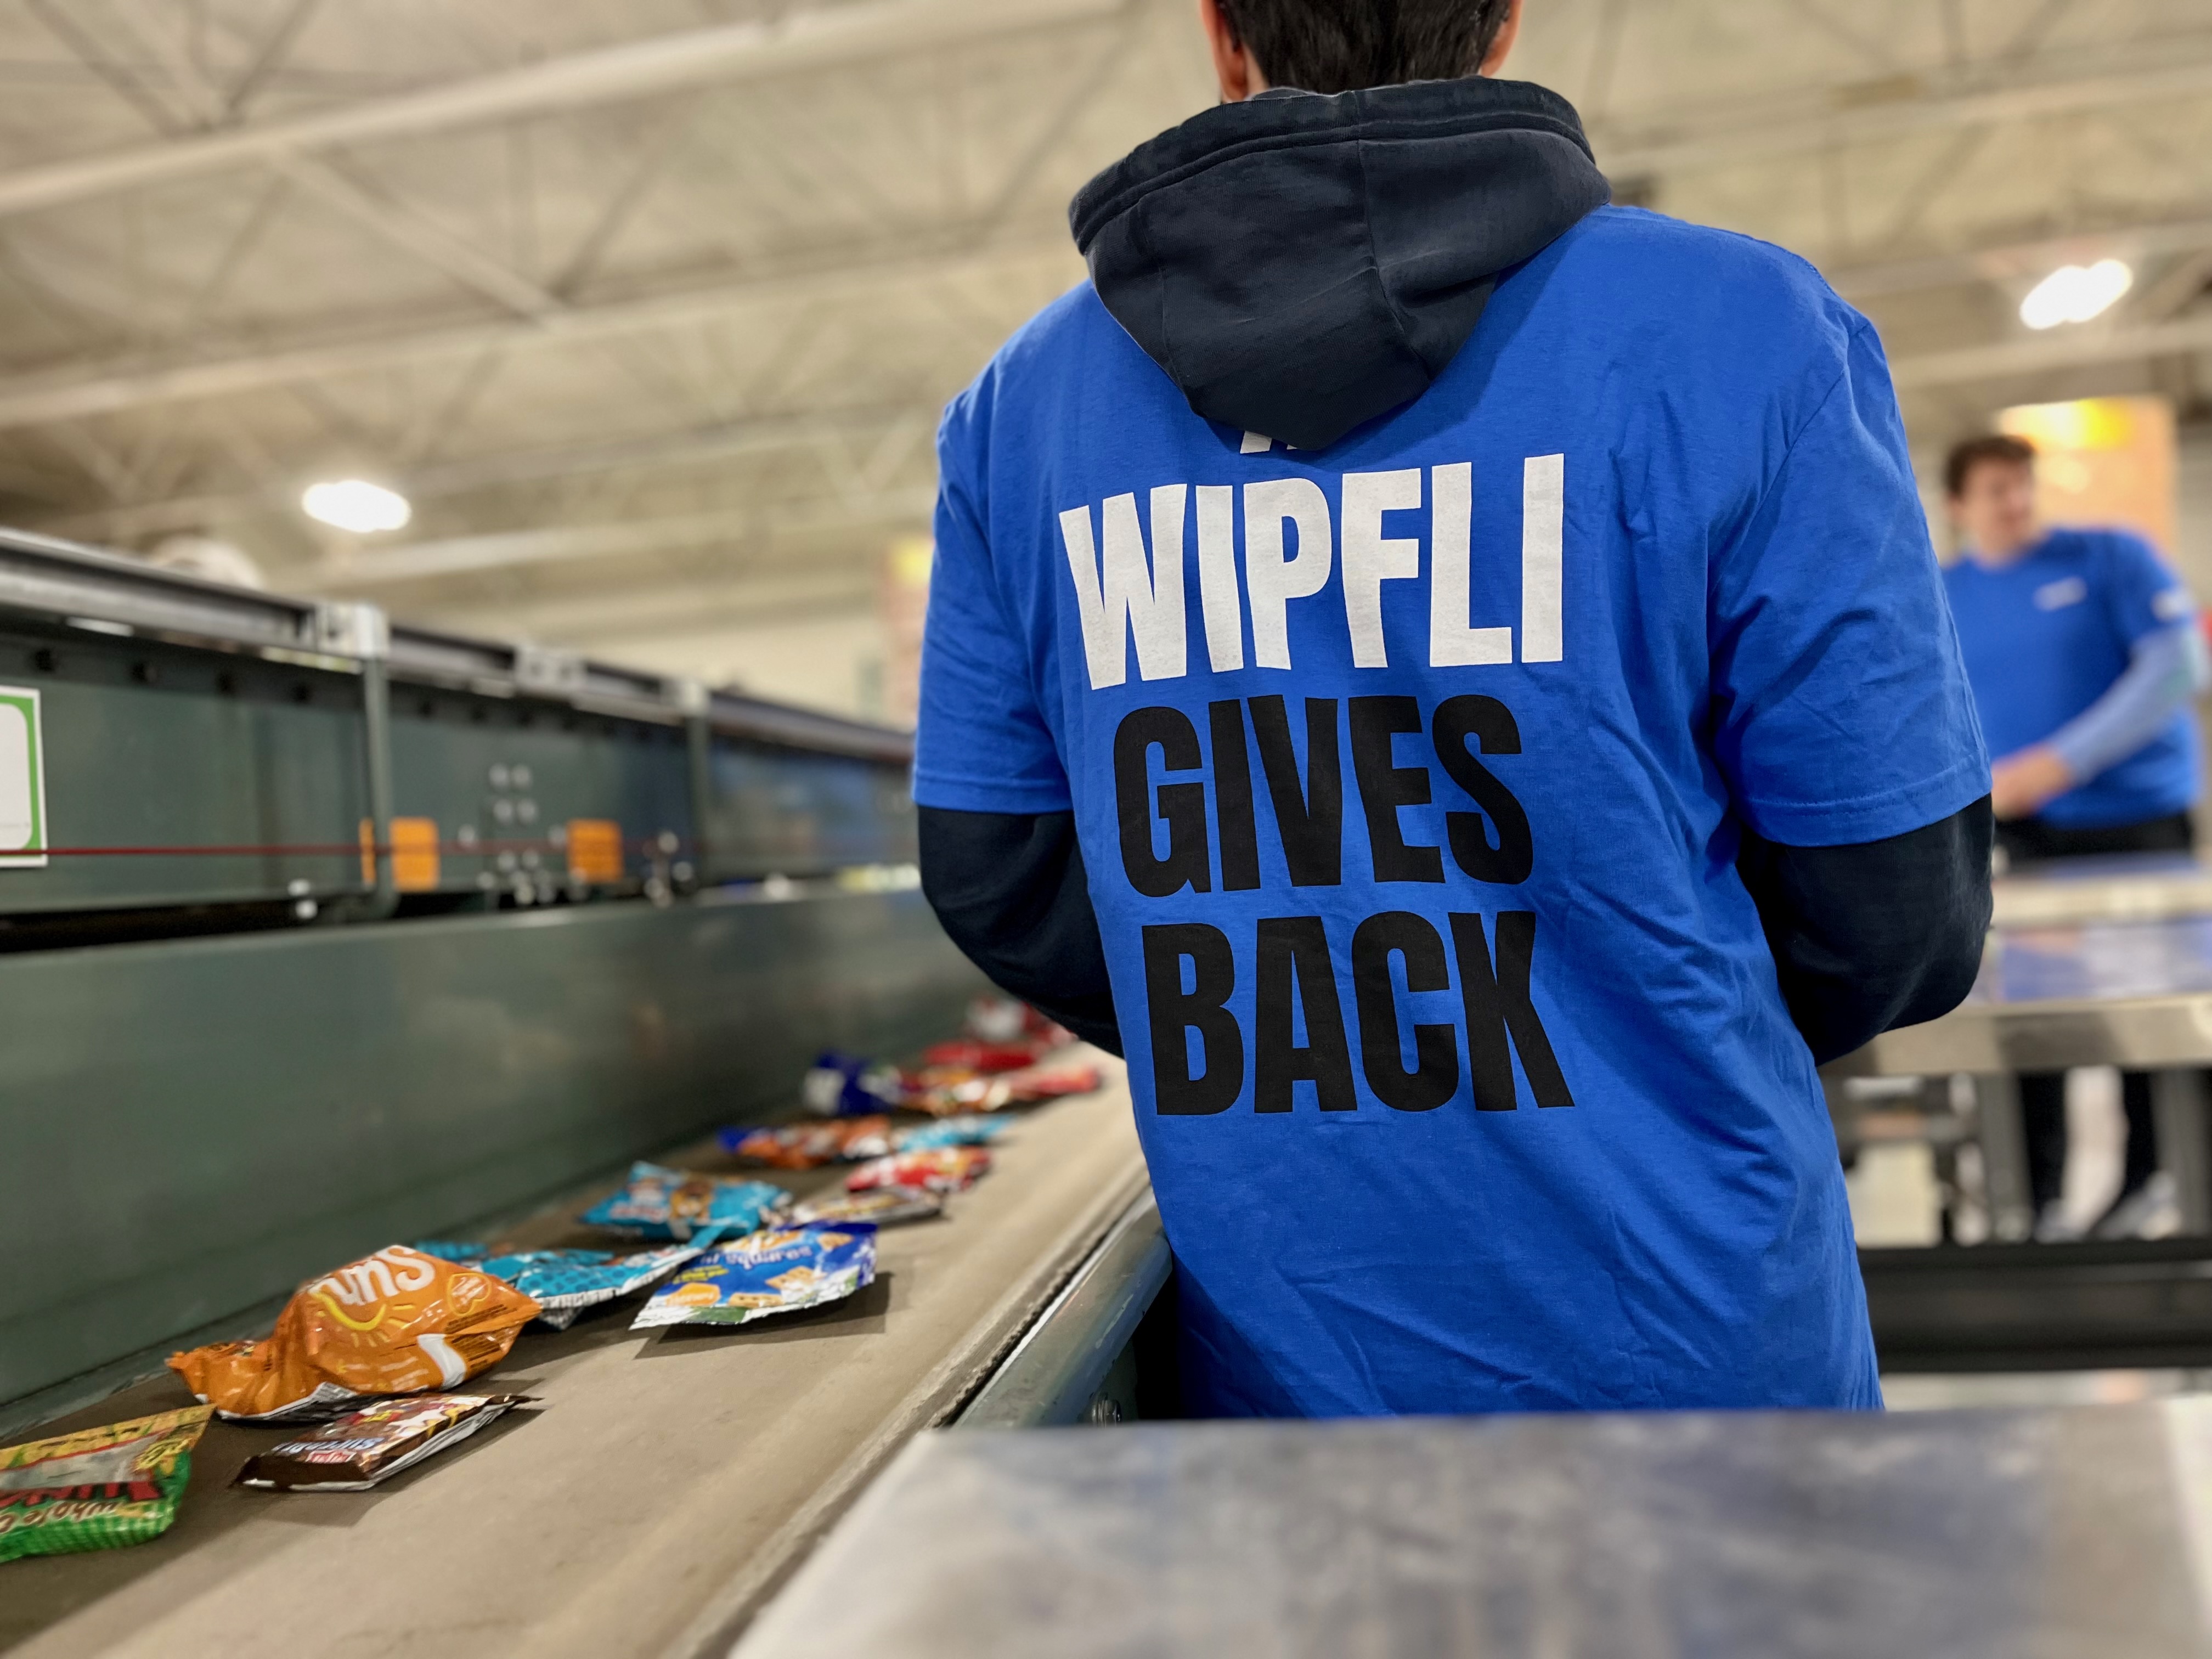 A team member faces away from the camera and wears a t-shirt that reads “Wipfli Gives Back” 